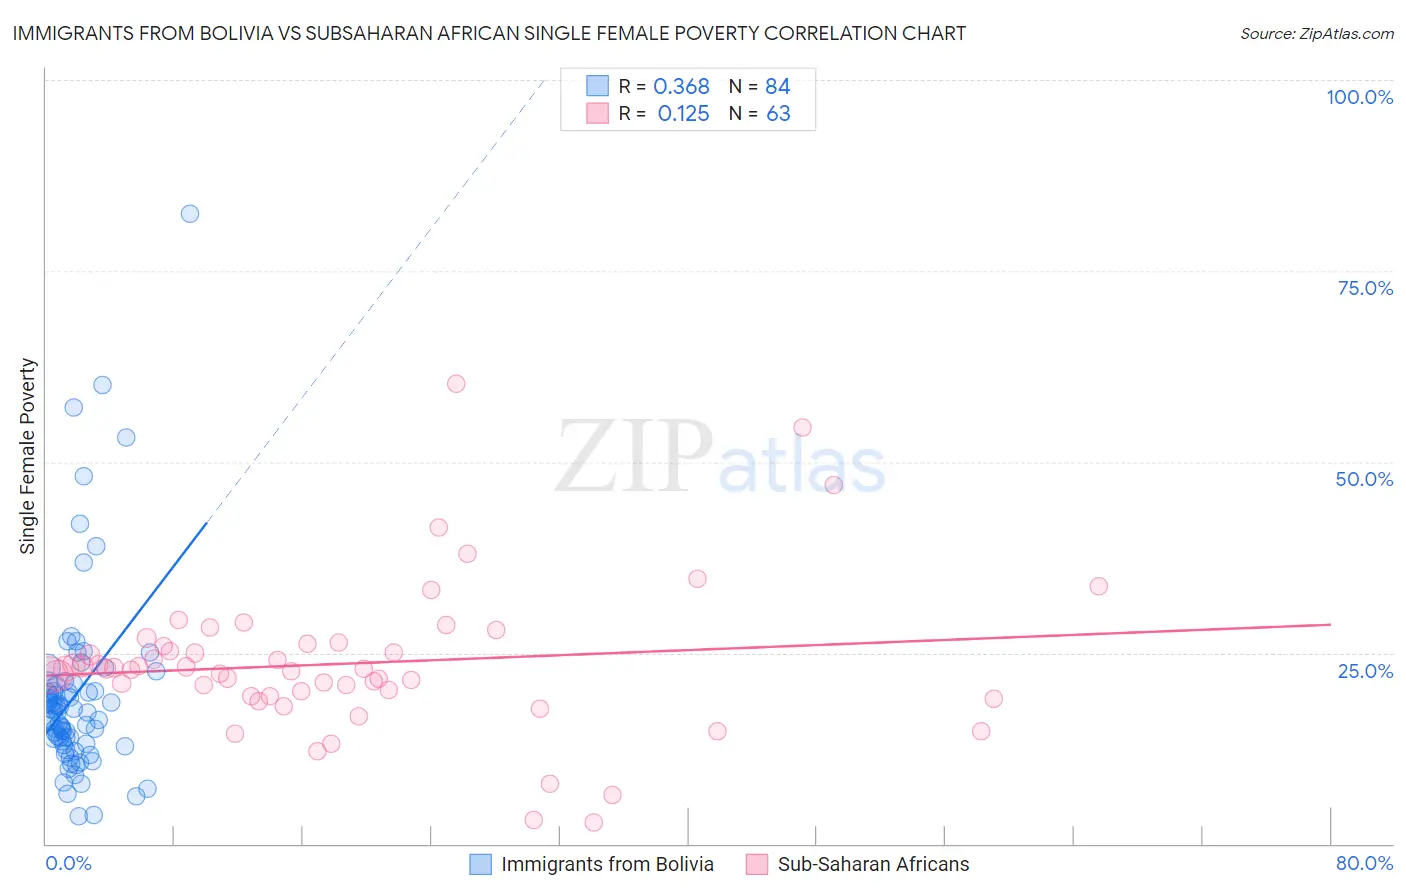 Immigrants from Bolivia vs Subsaharan African Single Female Poverty